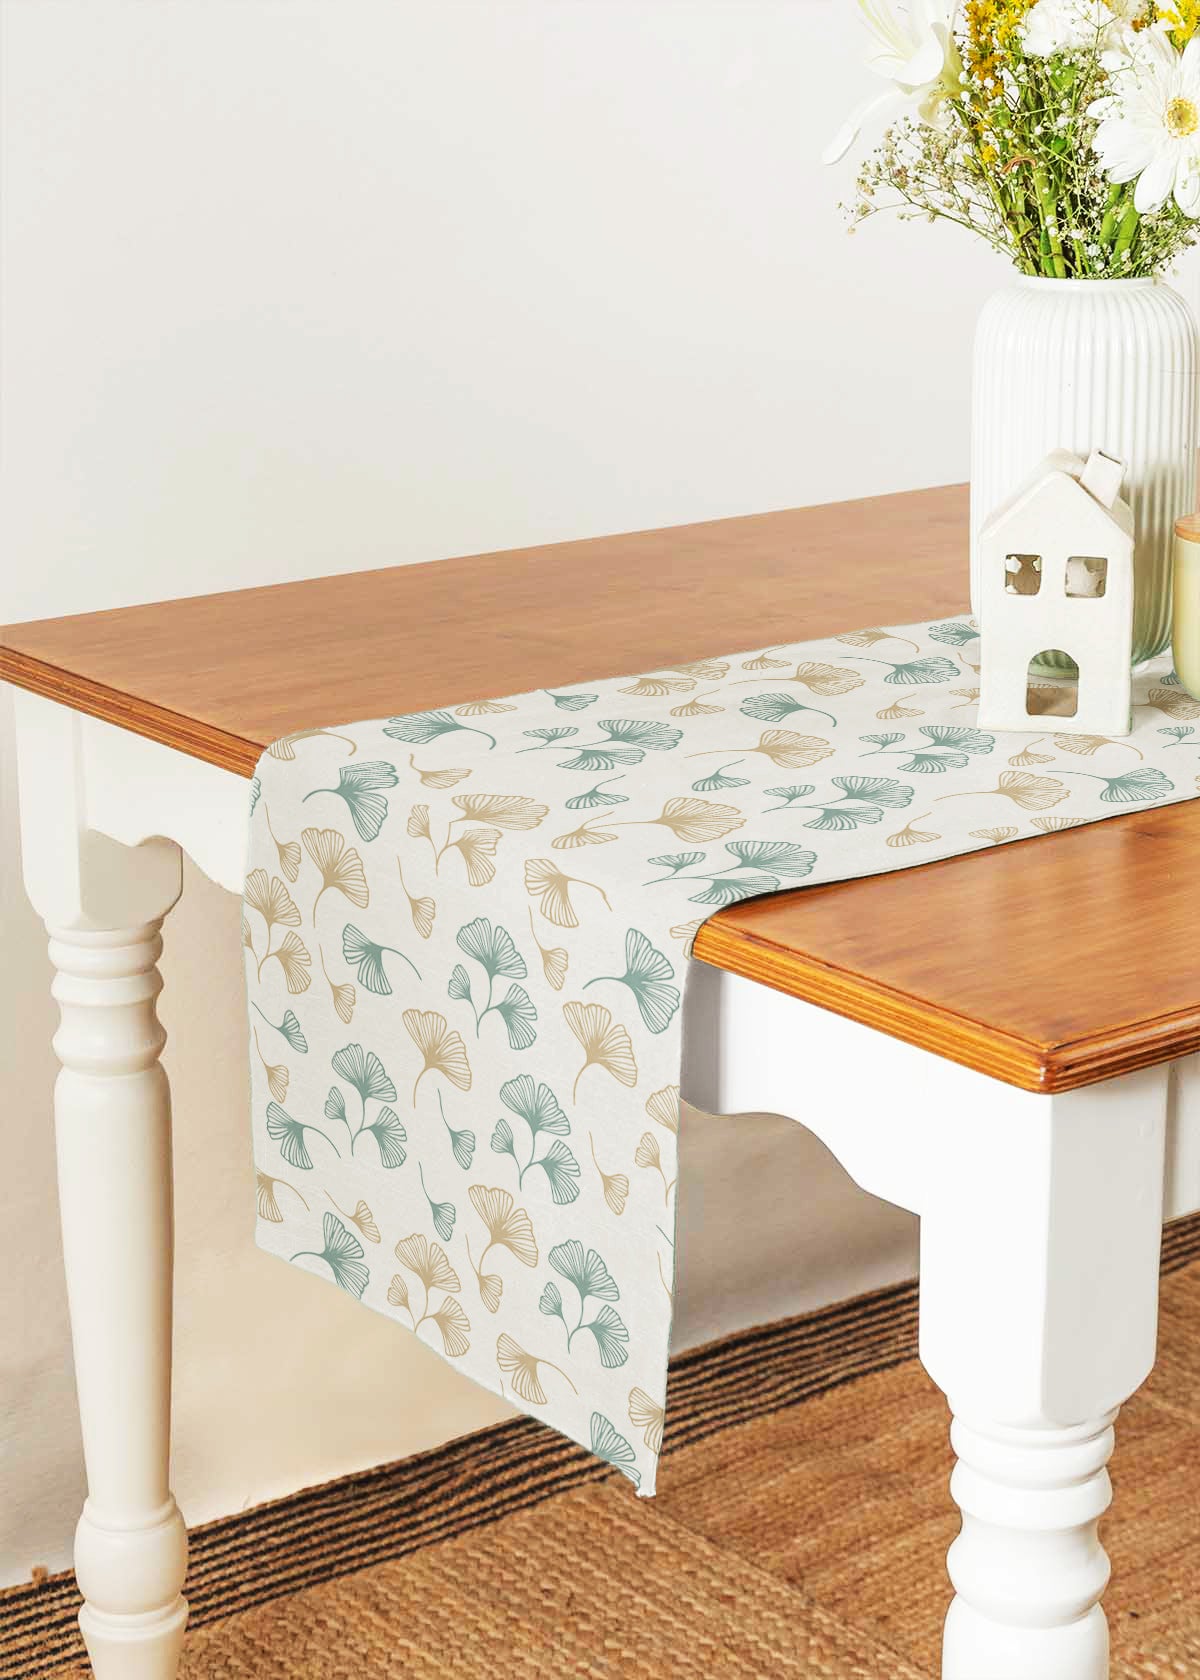 Gingko 100% cotton floral table runner for 4 seater or 6 seater Dining with tassels - Nile blue